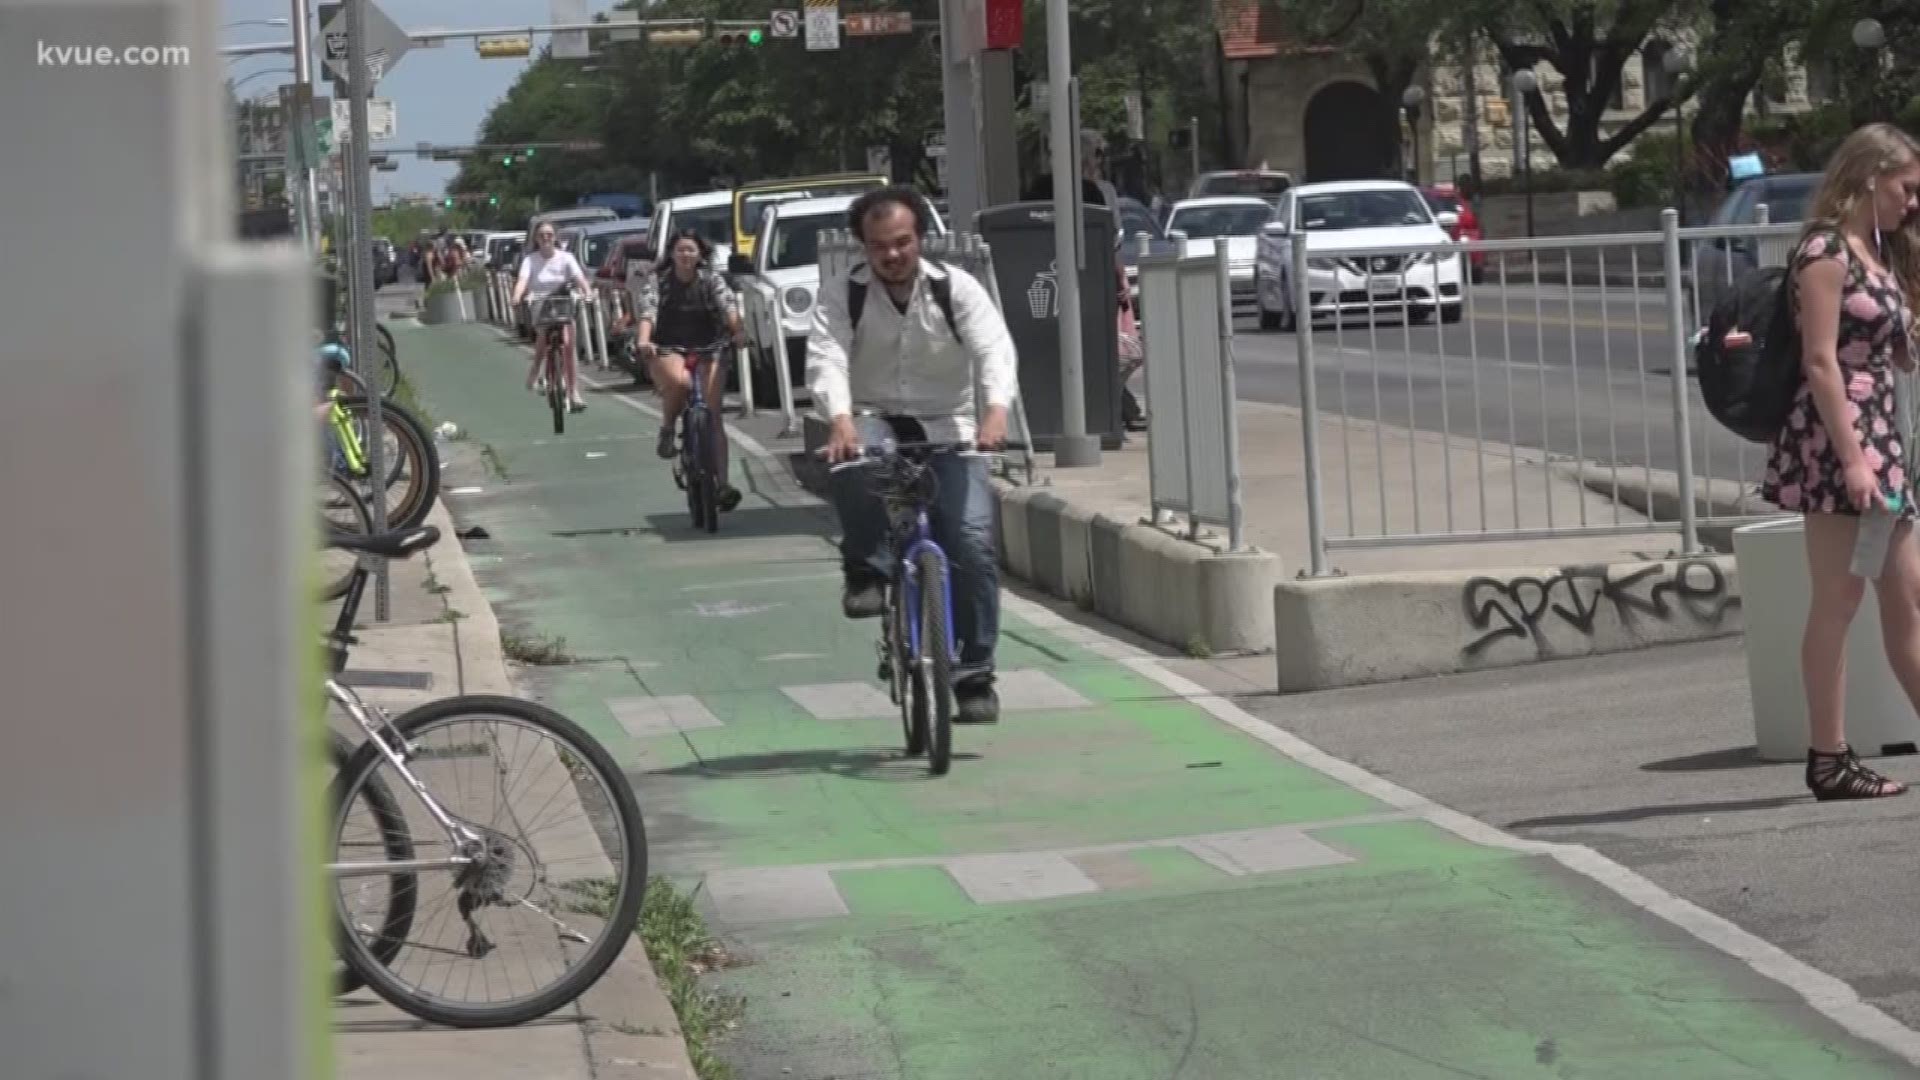 A new study says Guadalupe Street near downtown is considered the most dangerous place to ride your bike in Austin.